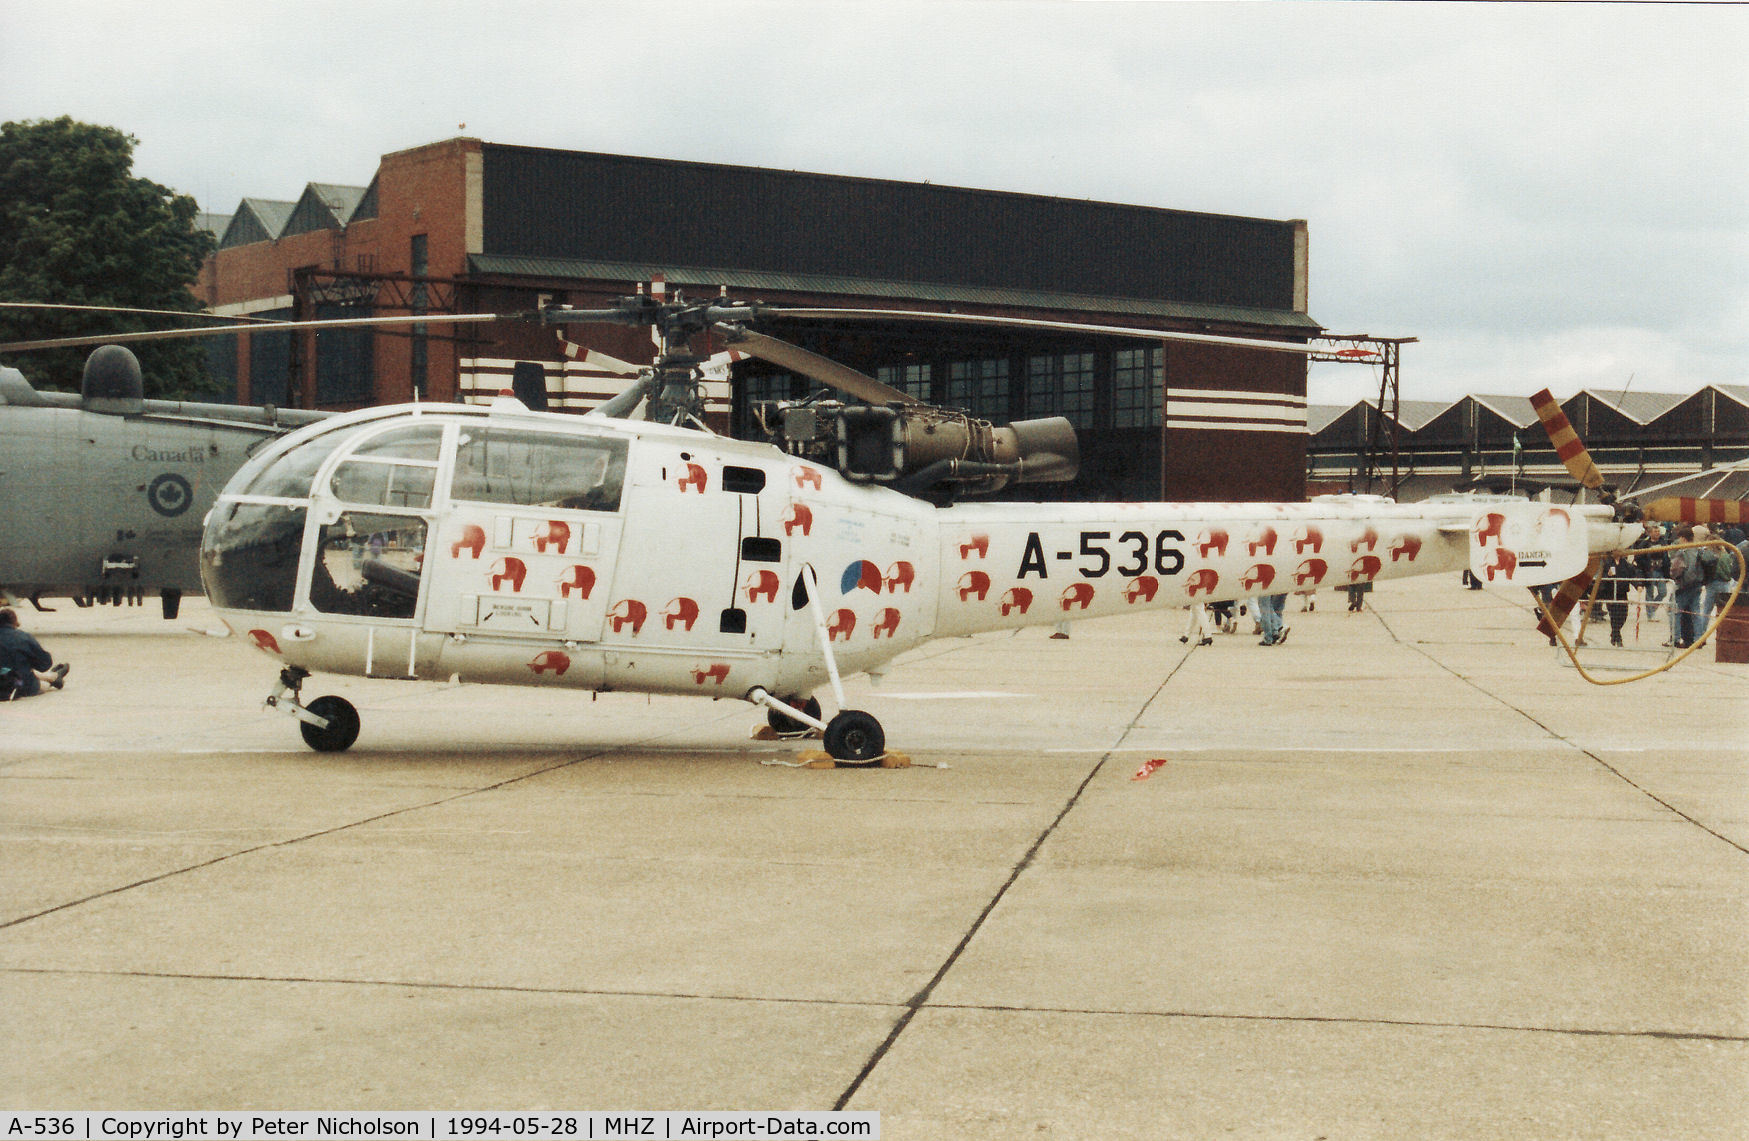 A-536, 1969 Sud SE-3160 Alouette III C/N 1536, Alouette III of 298 Squadron Royal Netherlands Air Force on display at the 1994 RAF Mildenhall Air Fete.